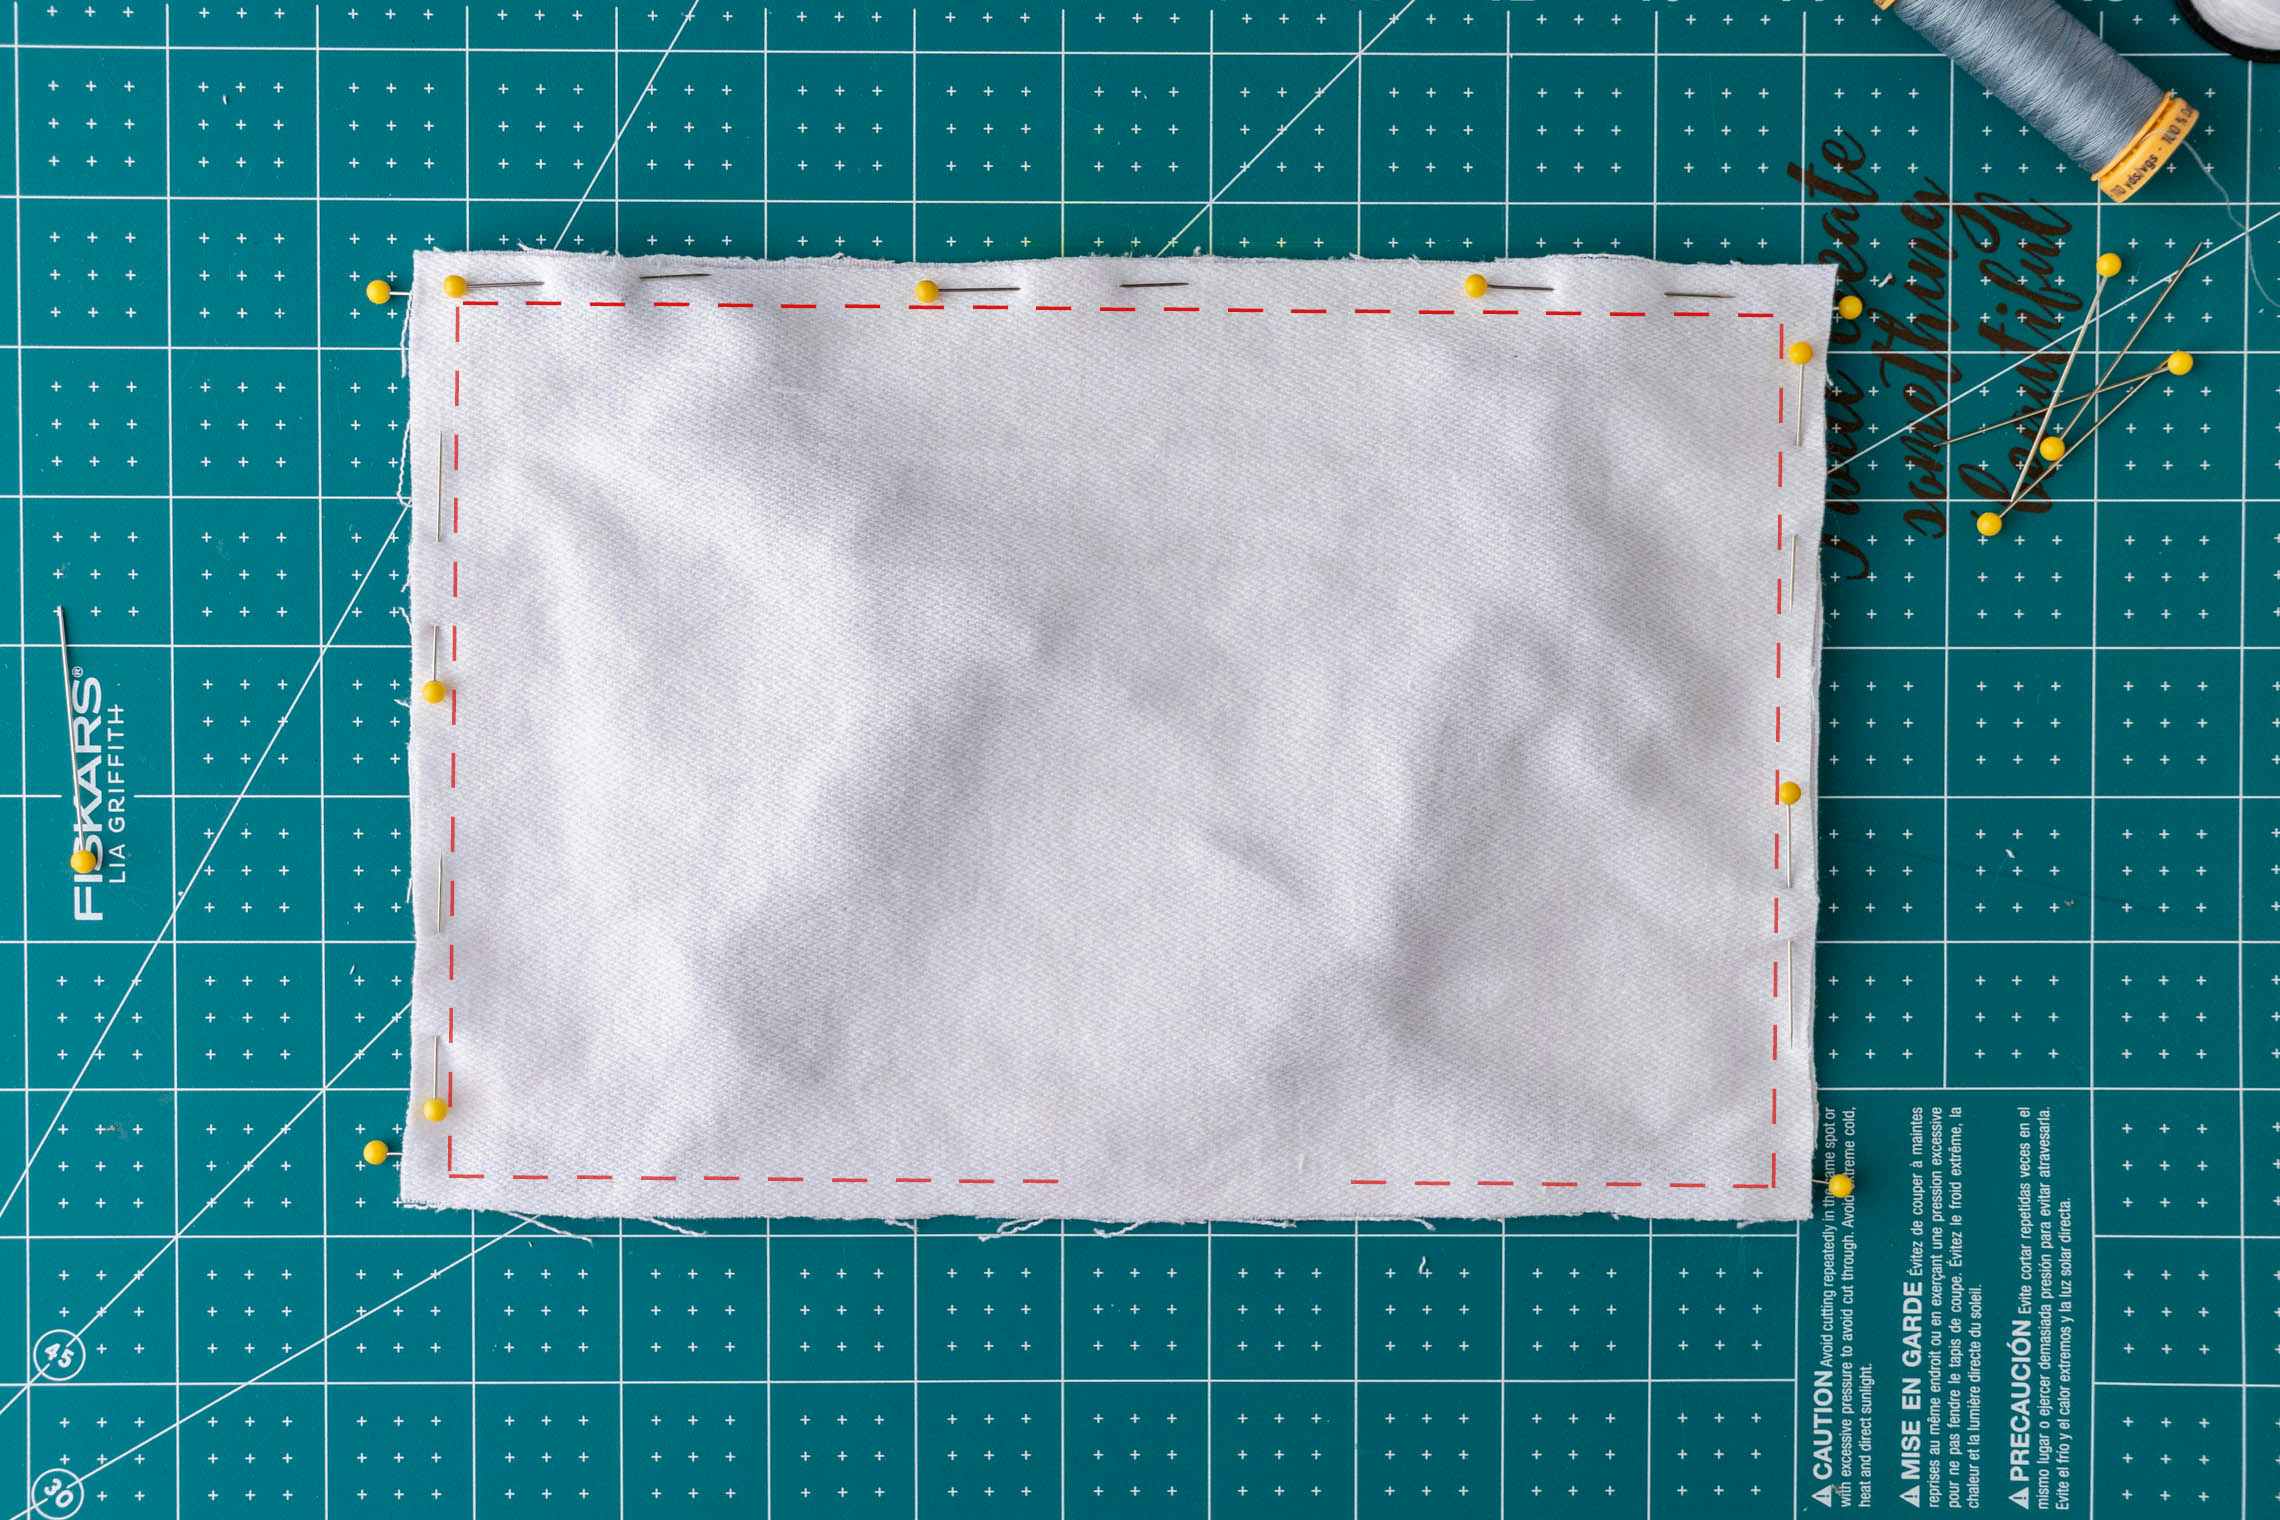 Fabric with red stitch marks showing 1/4" border to sew along the perimeter, leaving a hole at the bottom.